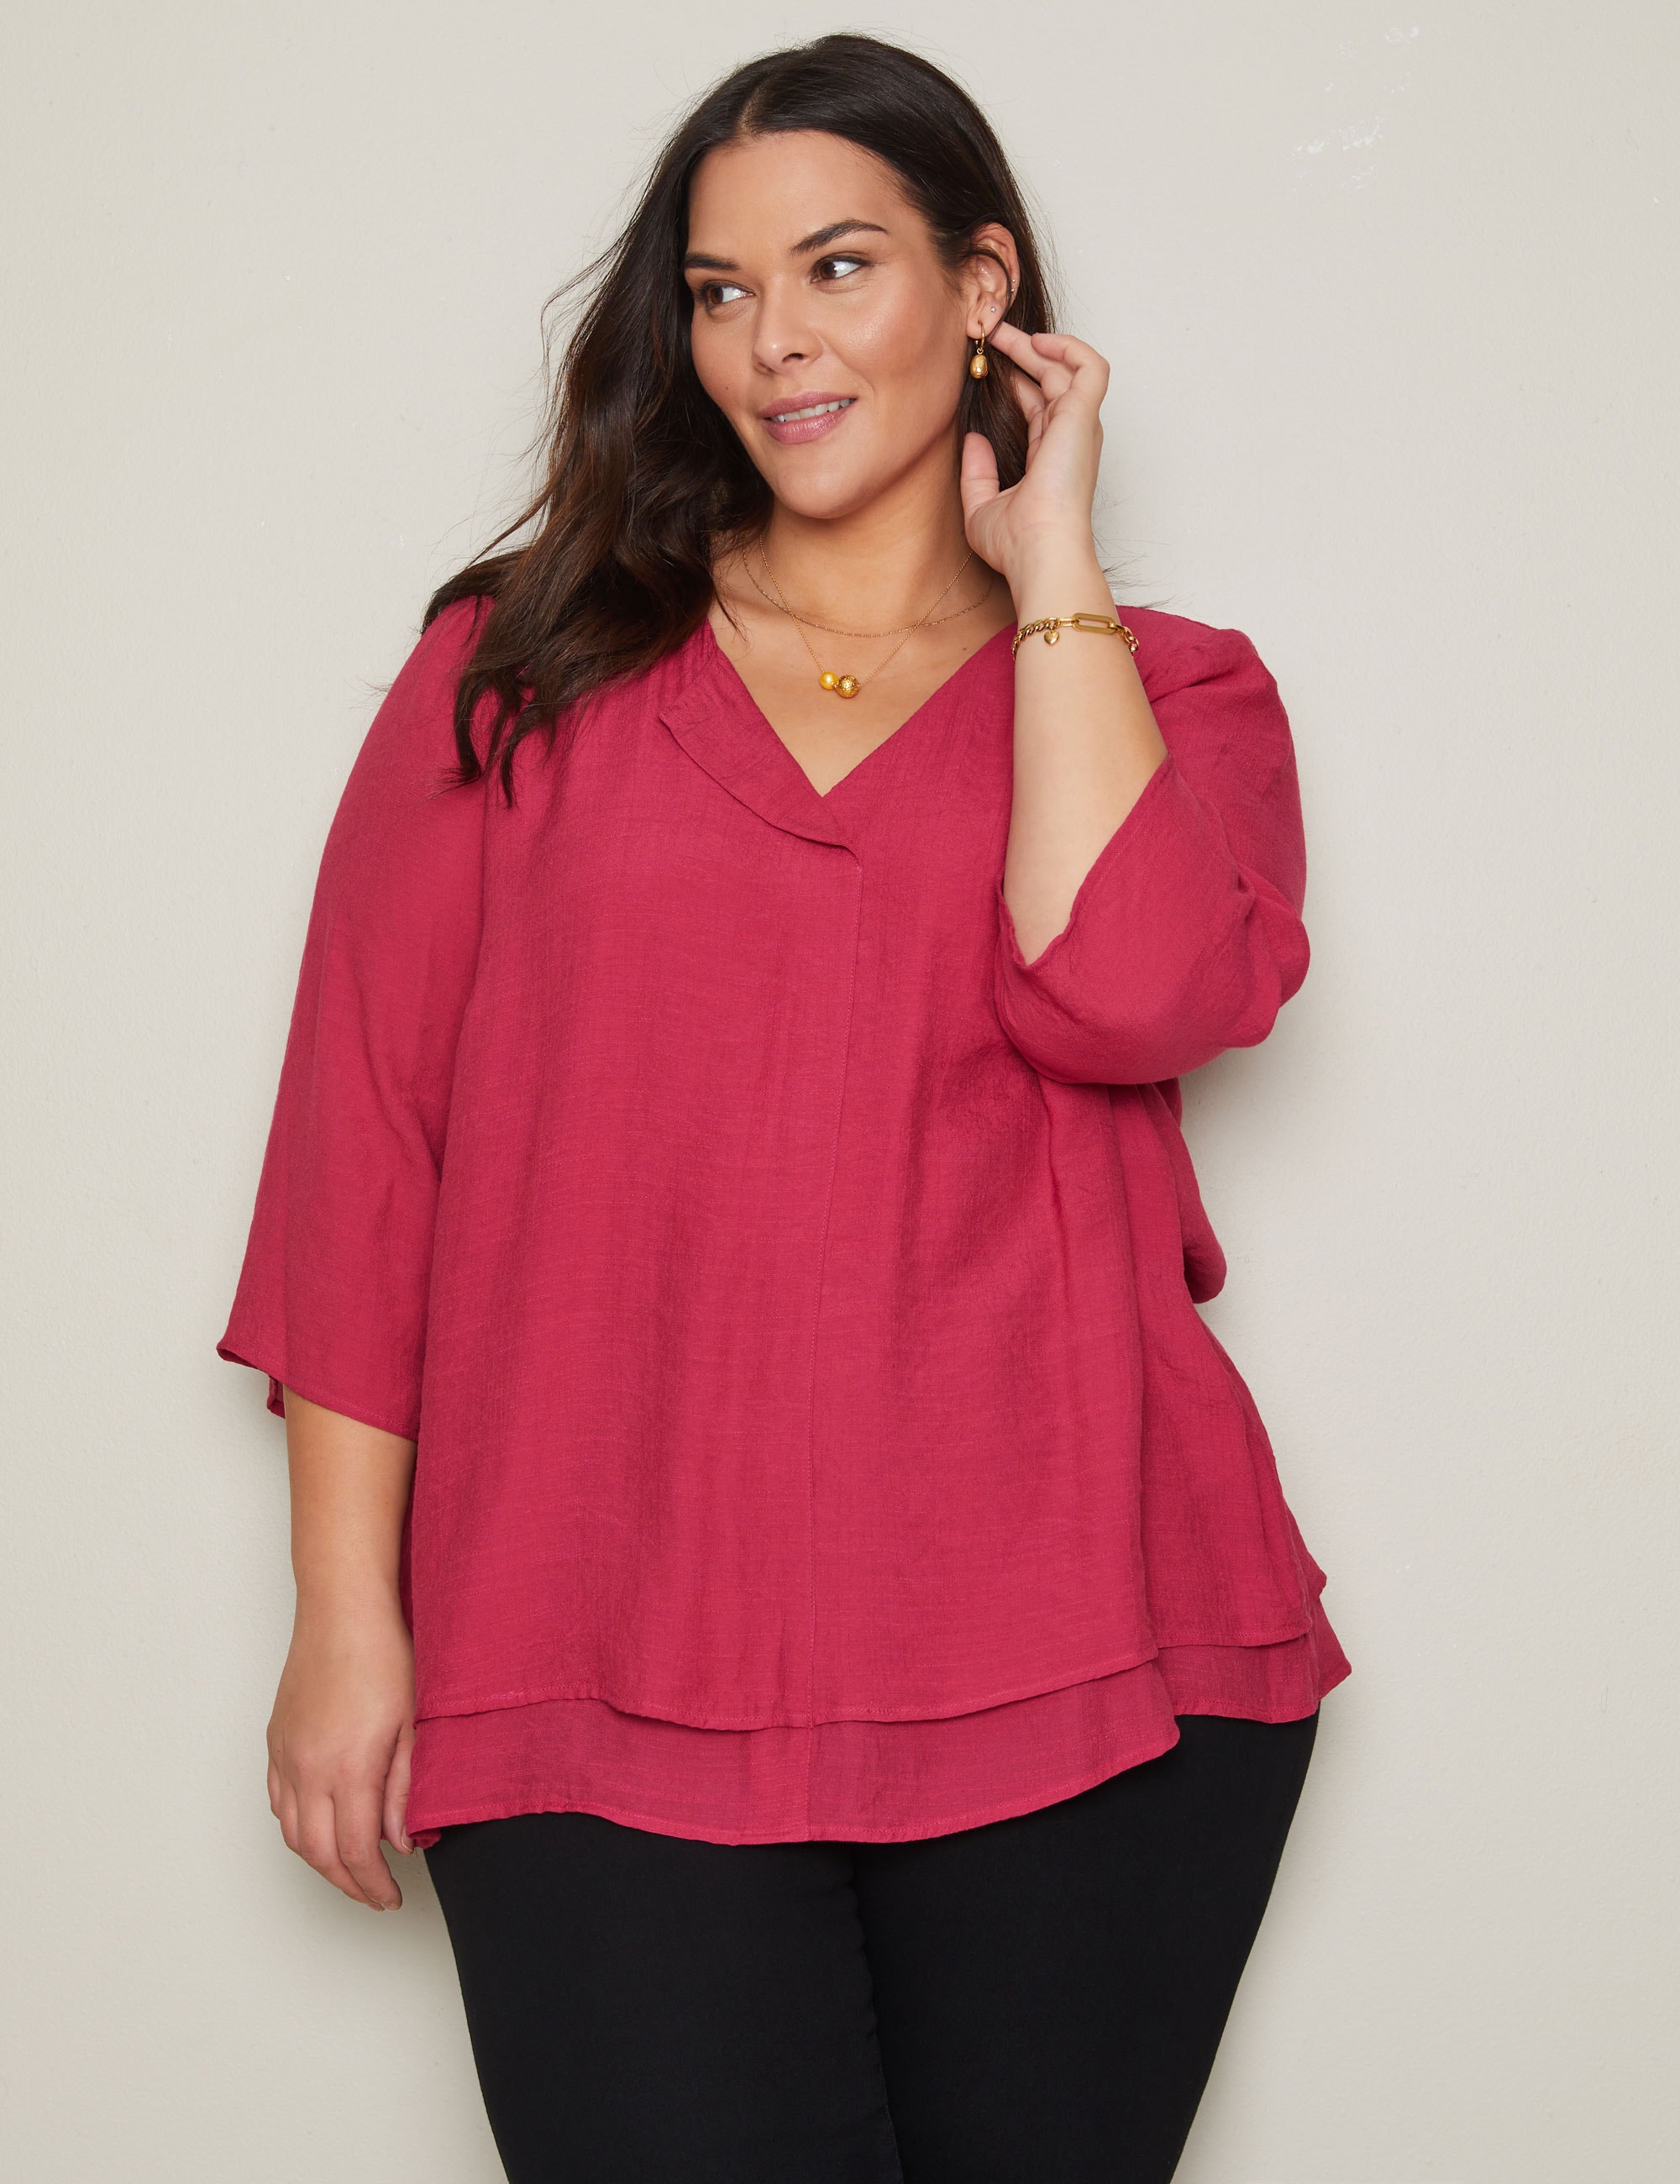 AUTOGRAPH - Plus Size - Womens Tops - Woven Double Layer Top